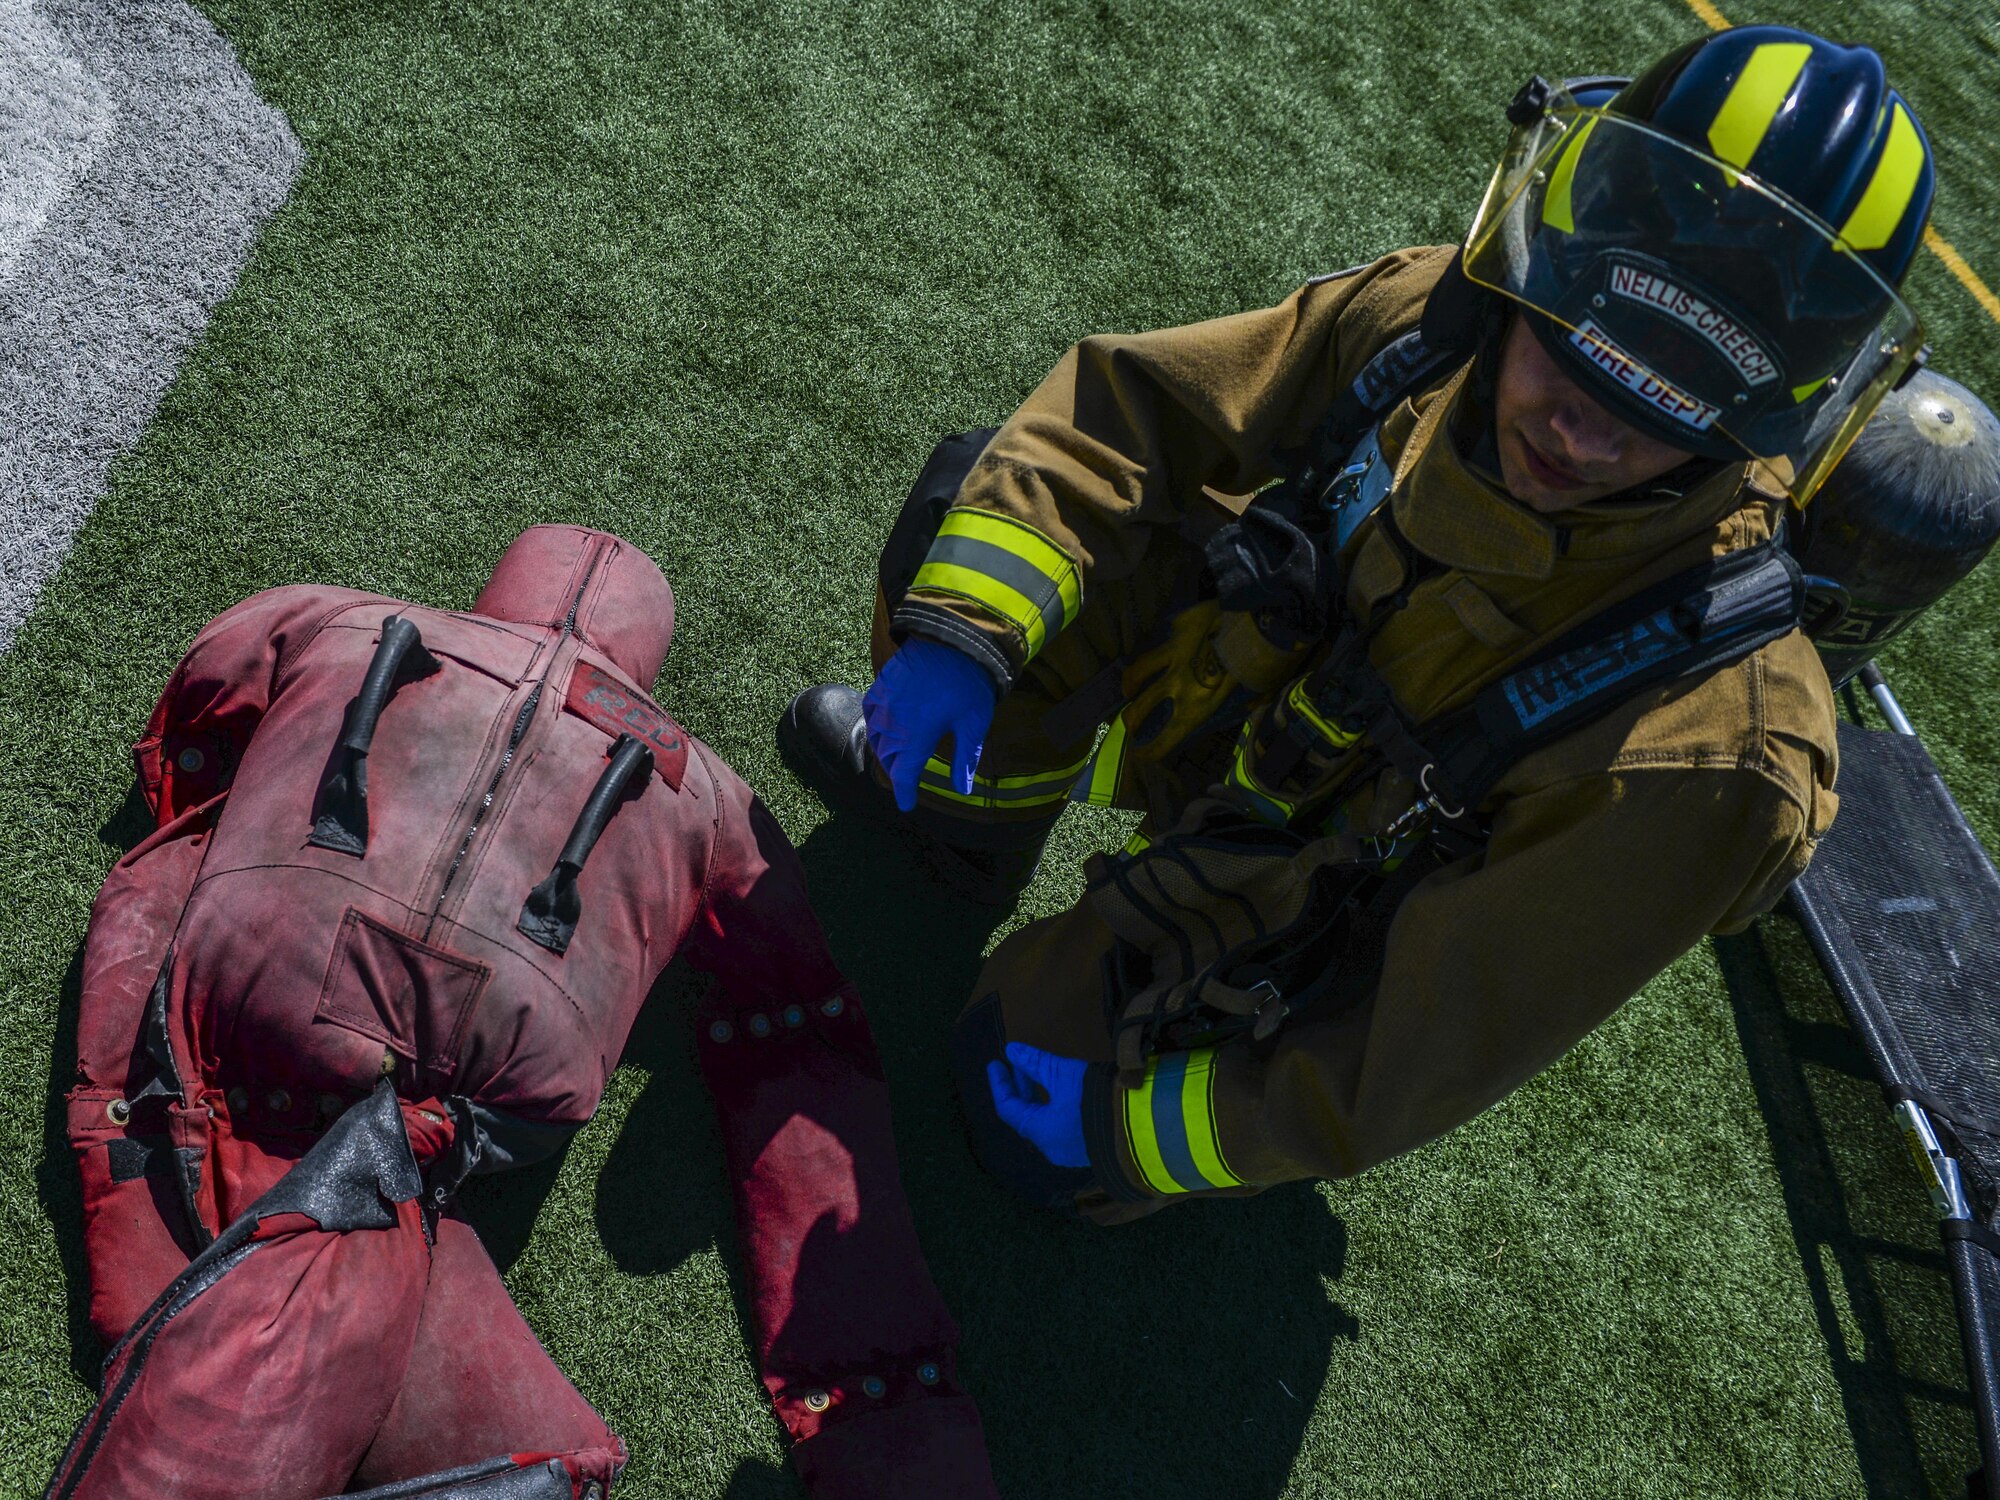 An Airman from the 99th Civil Engineer Squadron Fire Protection Flight checks a simulated victim for injuries before assigning a triage color during a base exercise at Nellis Air Force Base, Nev., May 12, 2016. Medical care is just one aspect of the extensive training that Air Force fire protection must undergo. (U.S. Air Force photo by Airman 1st Class Kevin Tanenbaum)